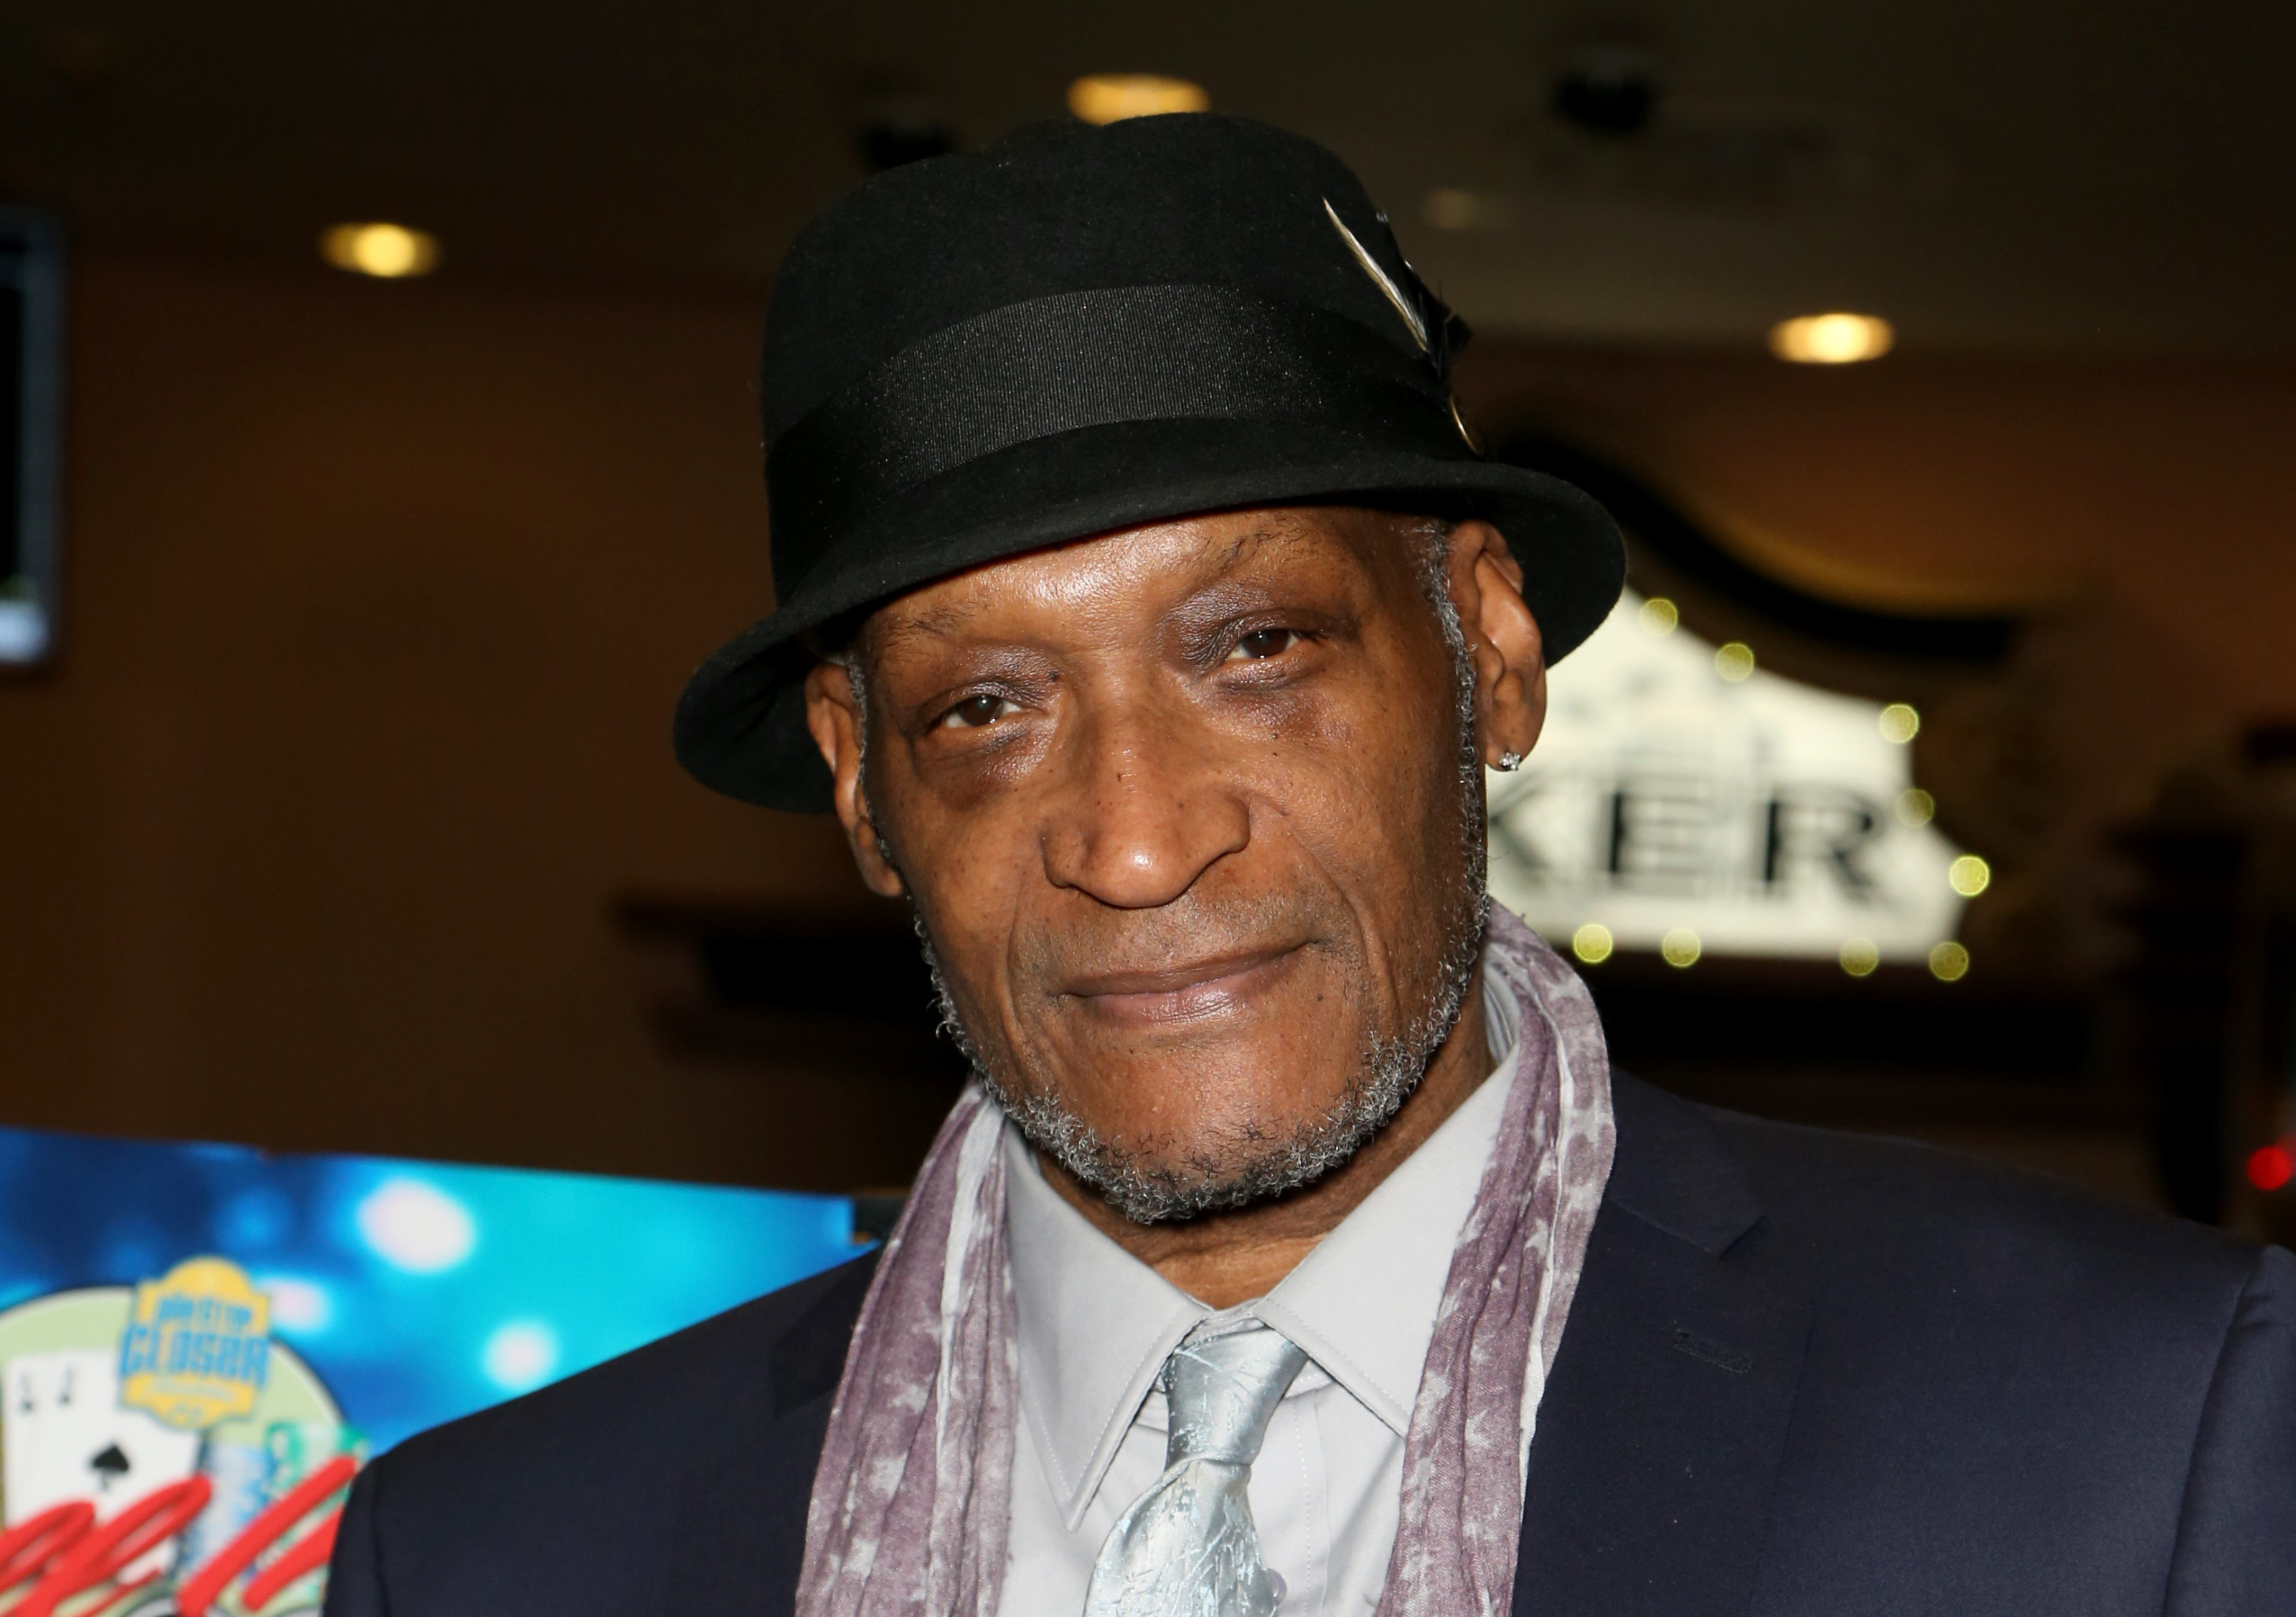 Candyman Icon Tony Todd On 'Fantastic' Way The Franchise Has Evolved